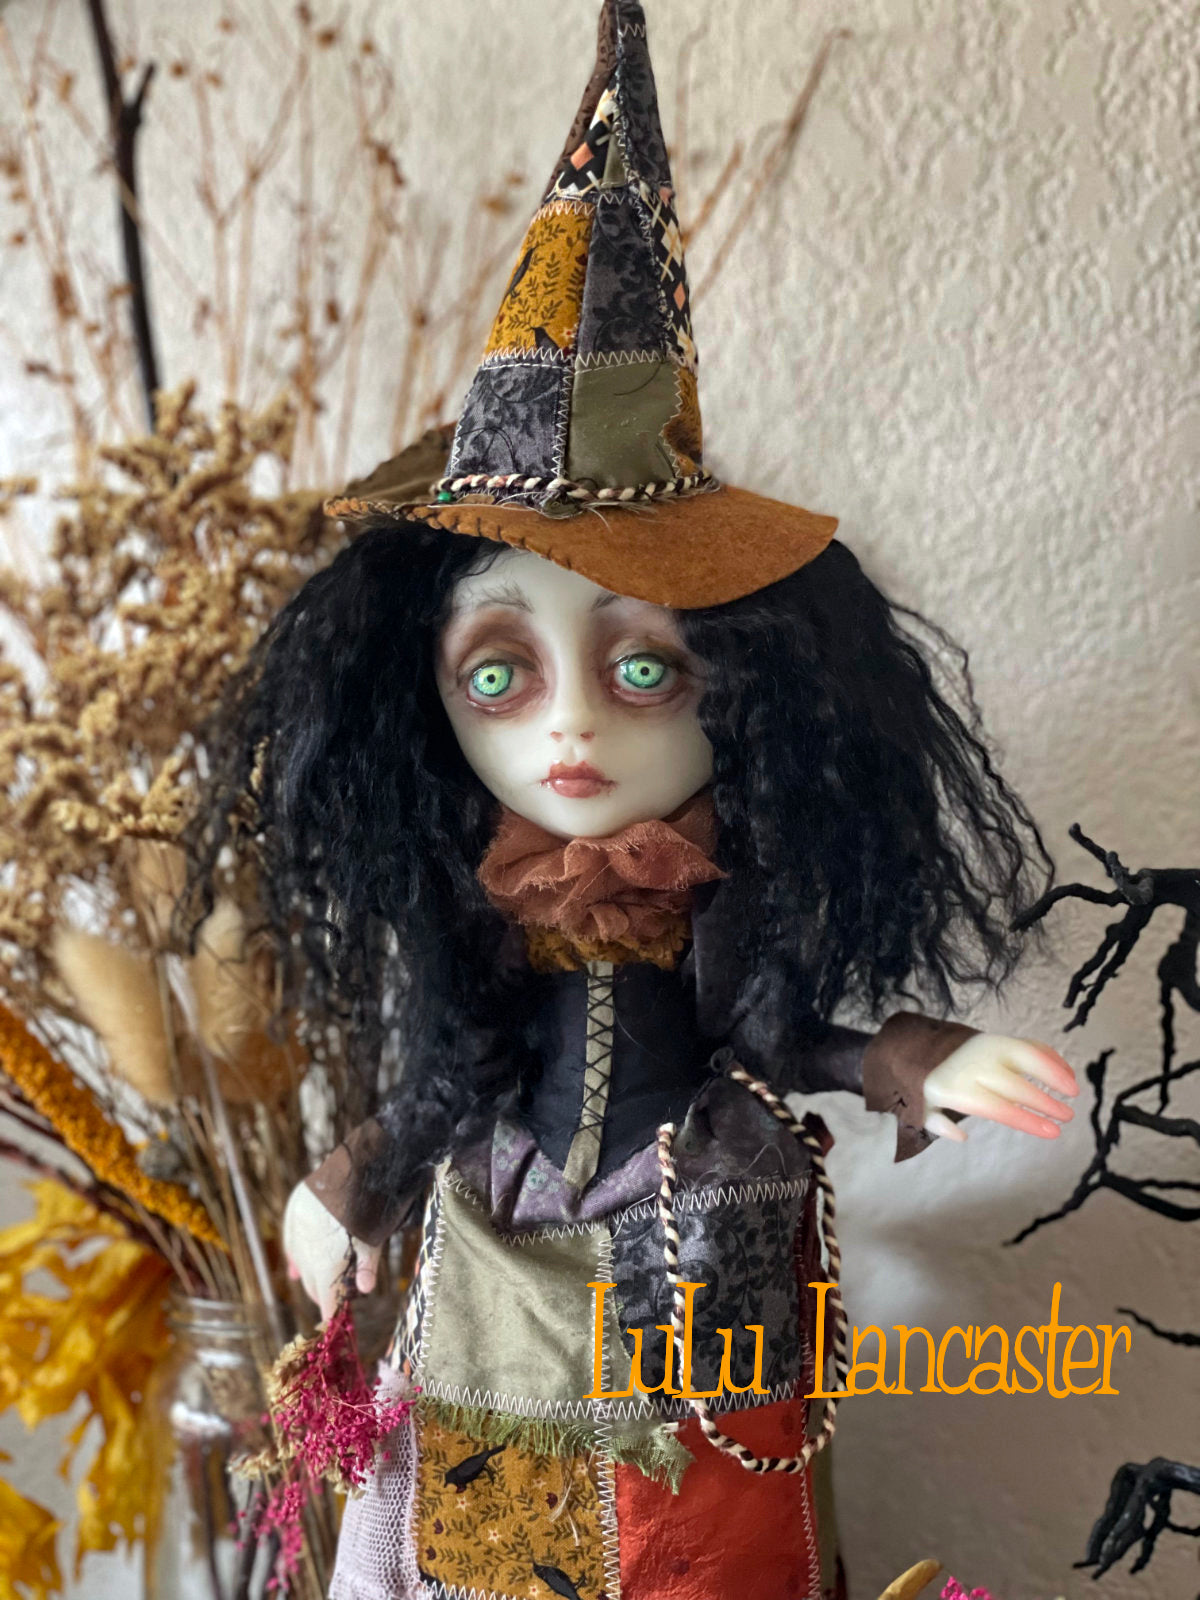 Sylvaine the patchwork Witch and Gregory the Goat Original LuLu Lancaster Art Doll